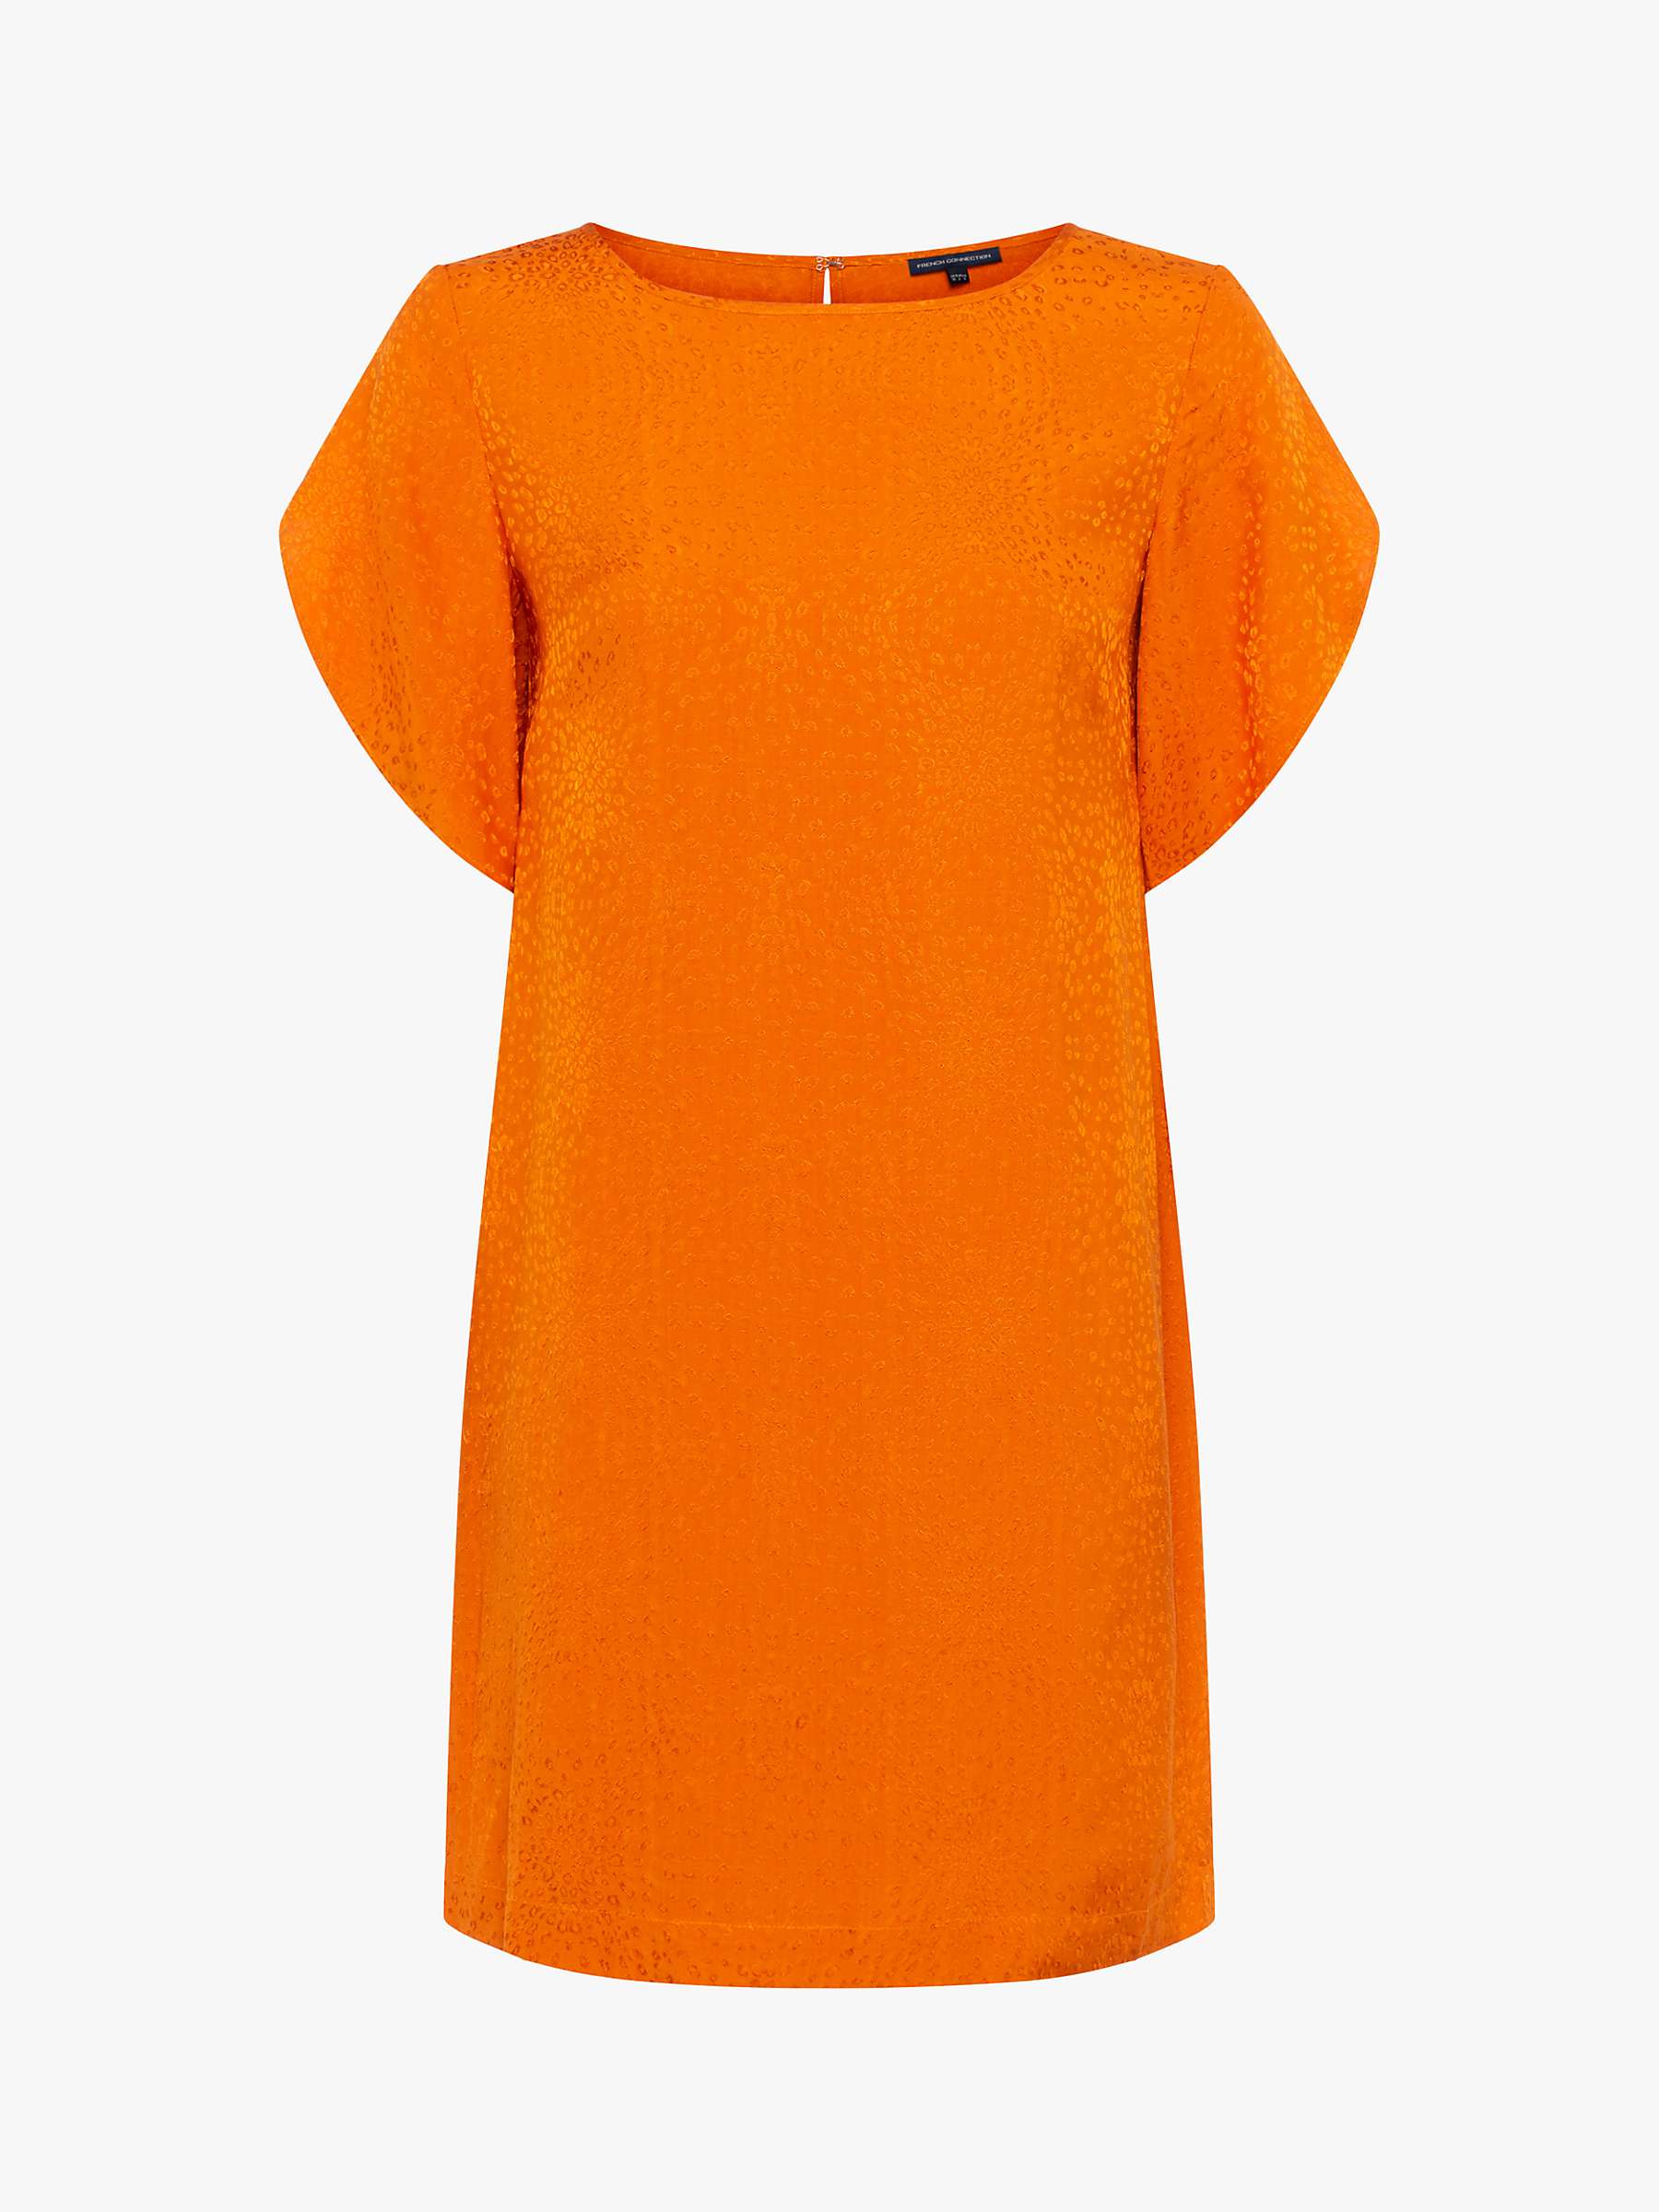 Buy French Connection Dua Drape Tunic Dress, Copper Sunset Online at johnlewis.com